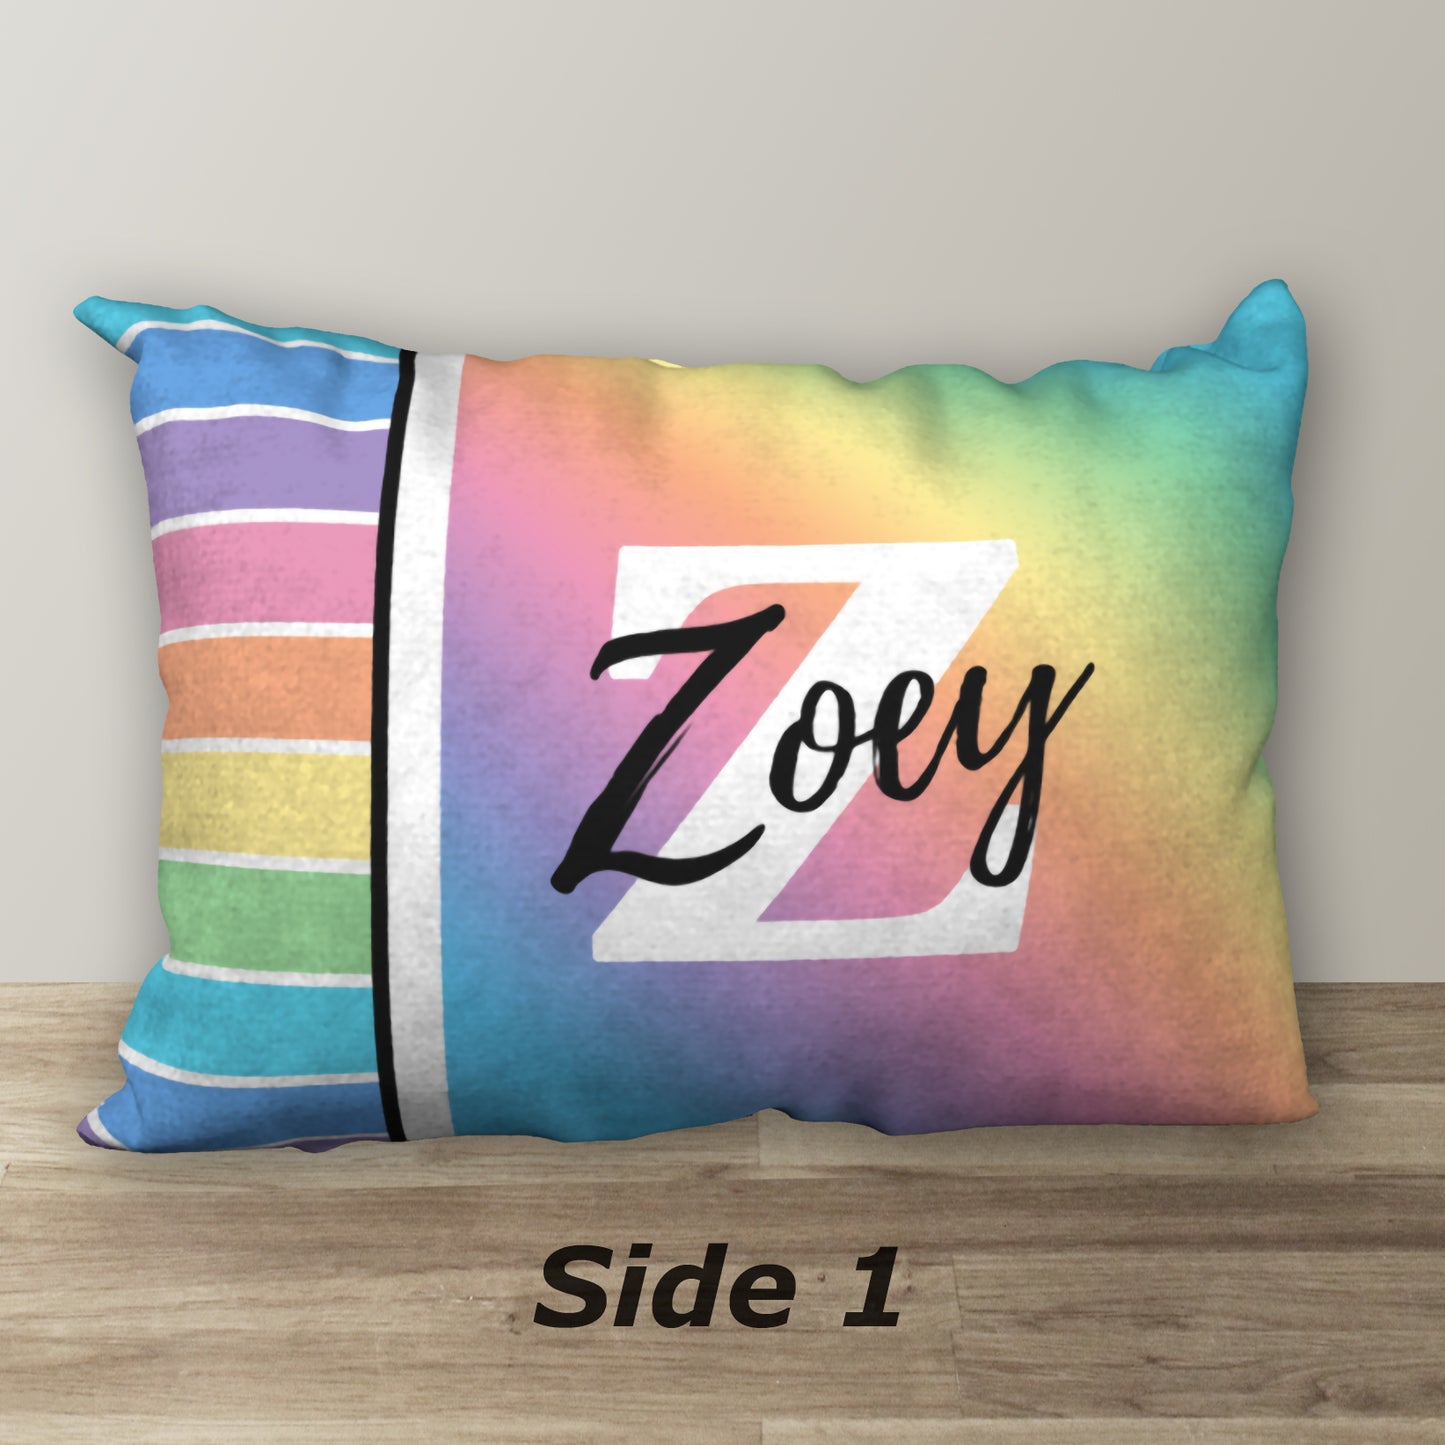 Personalized Pastel Rainbow Name Pillow THE FUTURE IS YOURS, 20"x14"